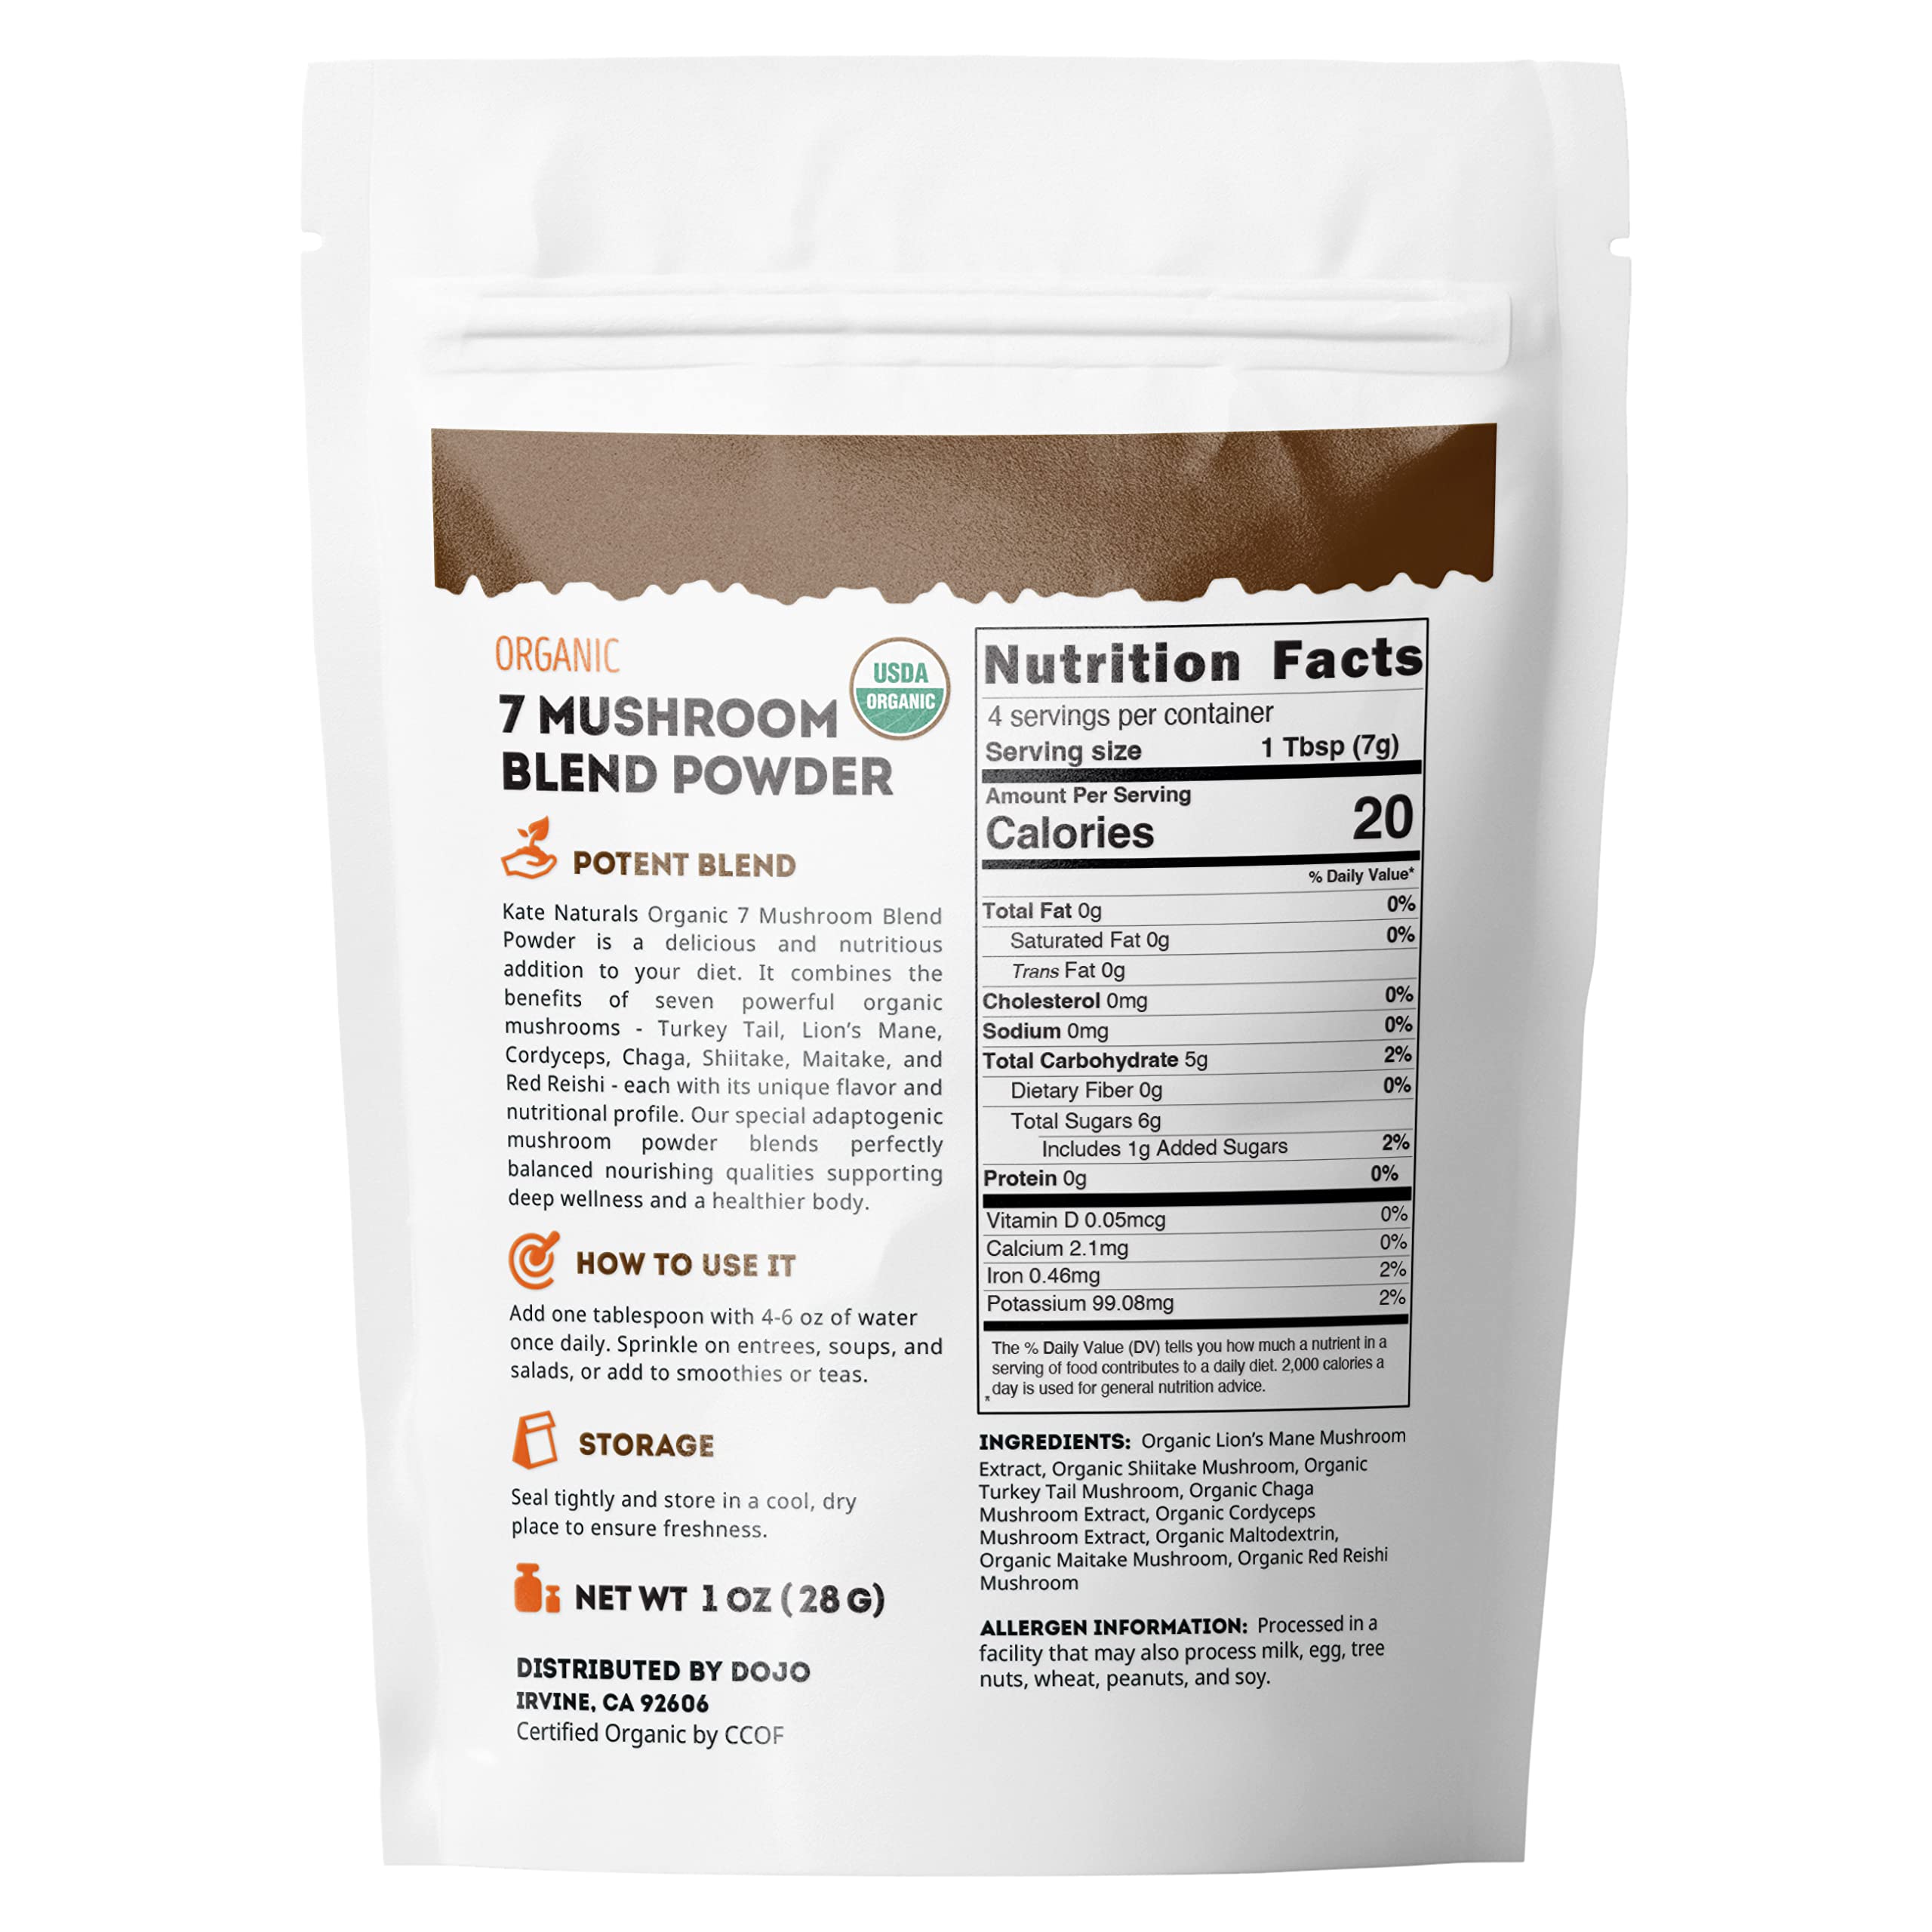 Kate Naturals Organic 7 Mushroom Blend Powder (1oz) - 100% Organic, Rich in Vitamins and Minerals, Antioxidants, Mushroom Superfood, Natural Immune Support, and Energy Booster. Resealable Bag.